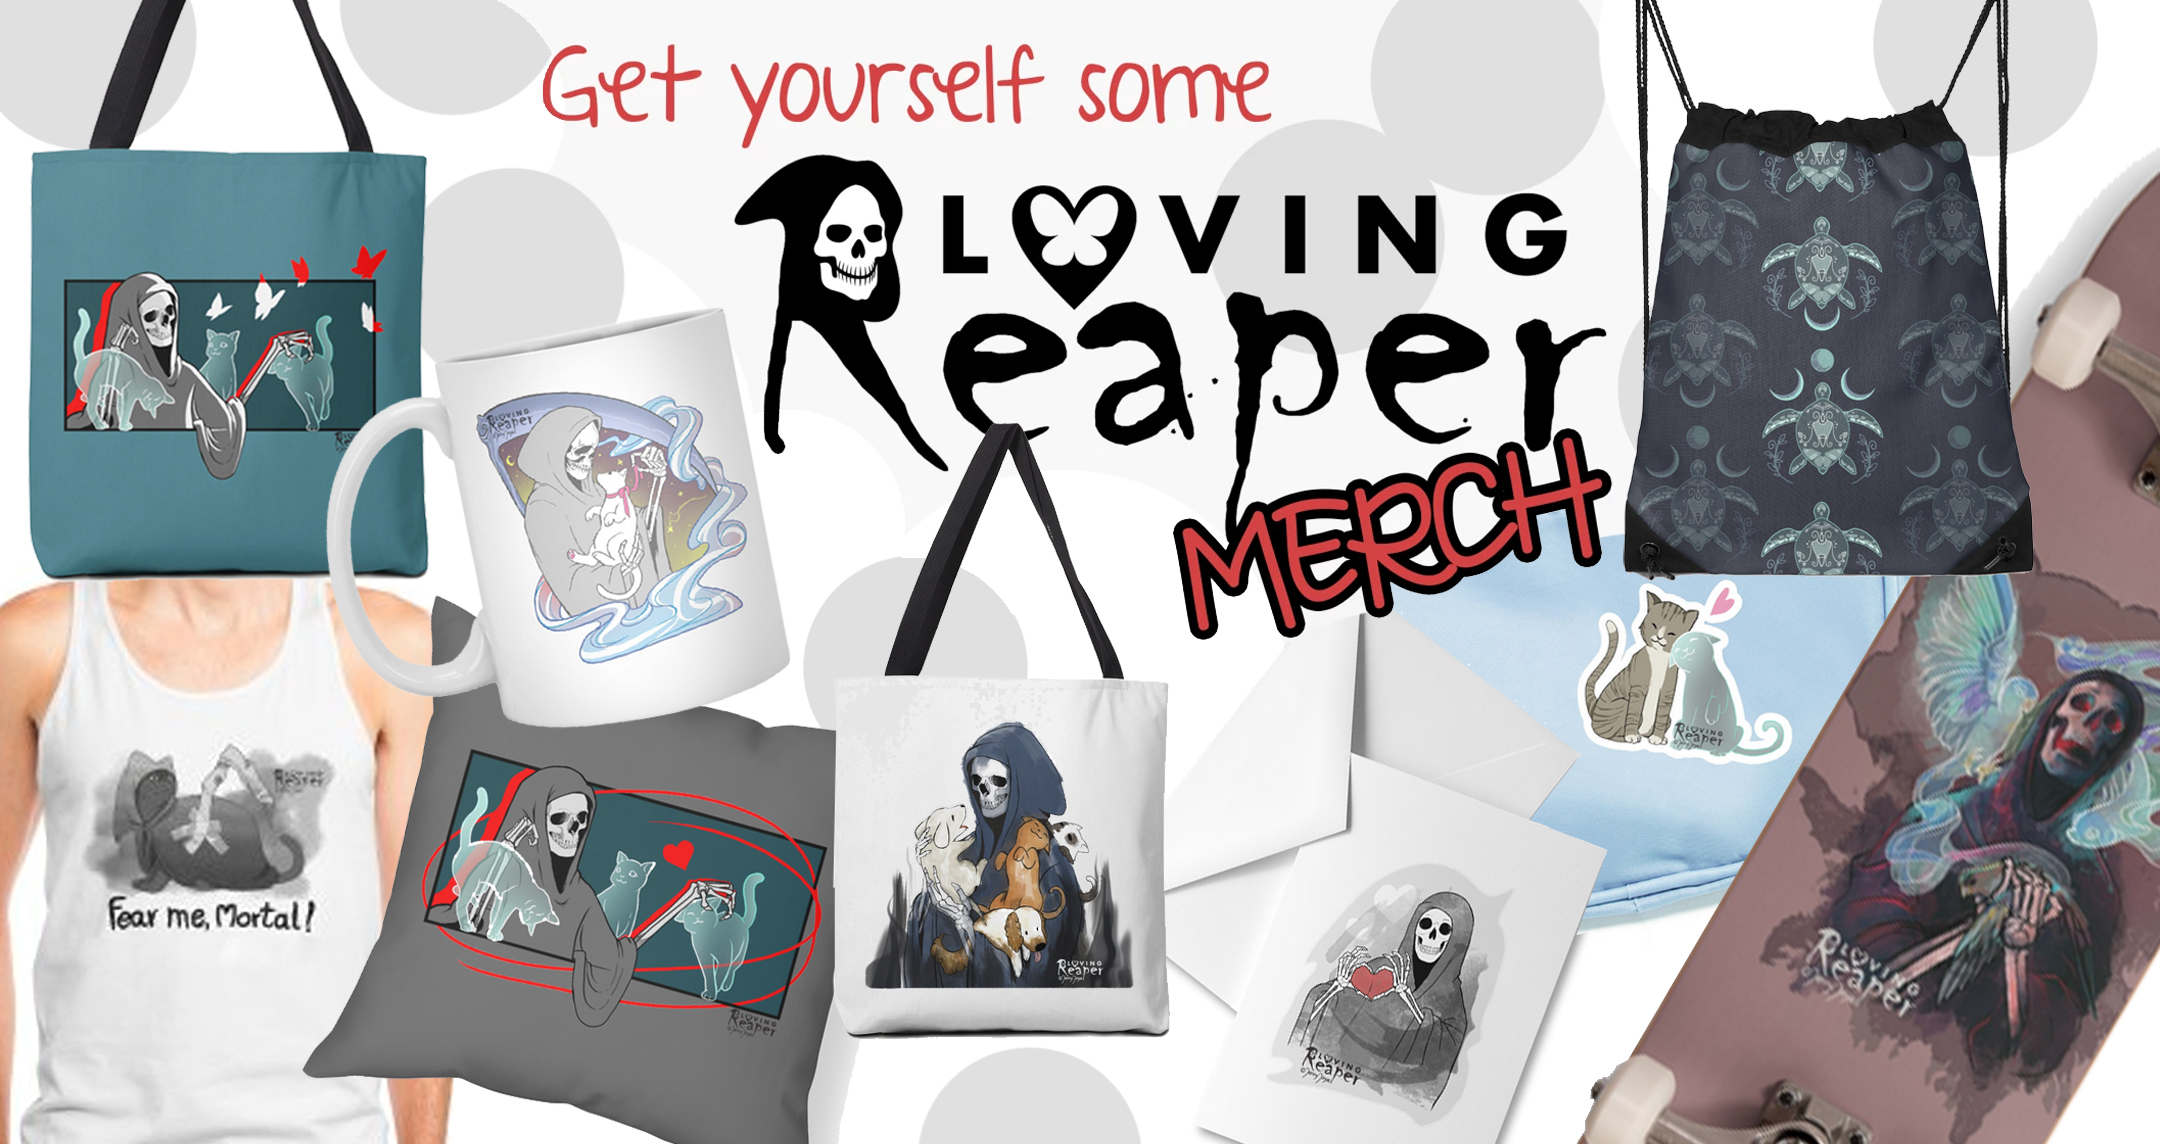 Get yourself some Loving Reaper merch